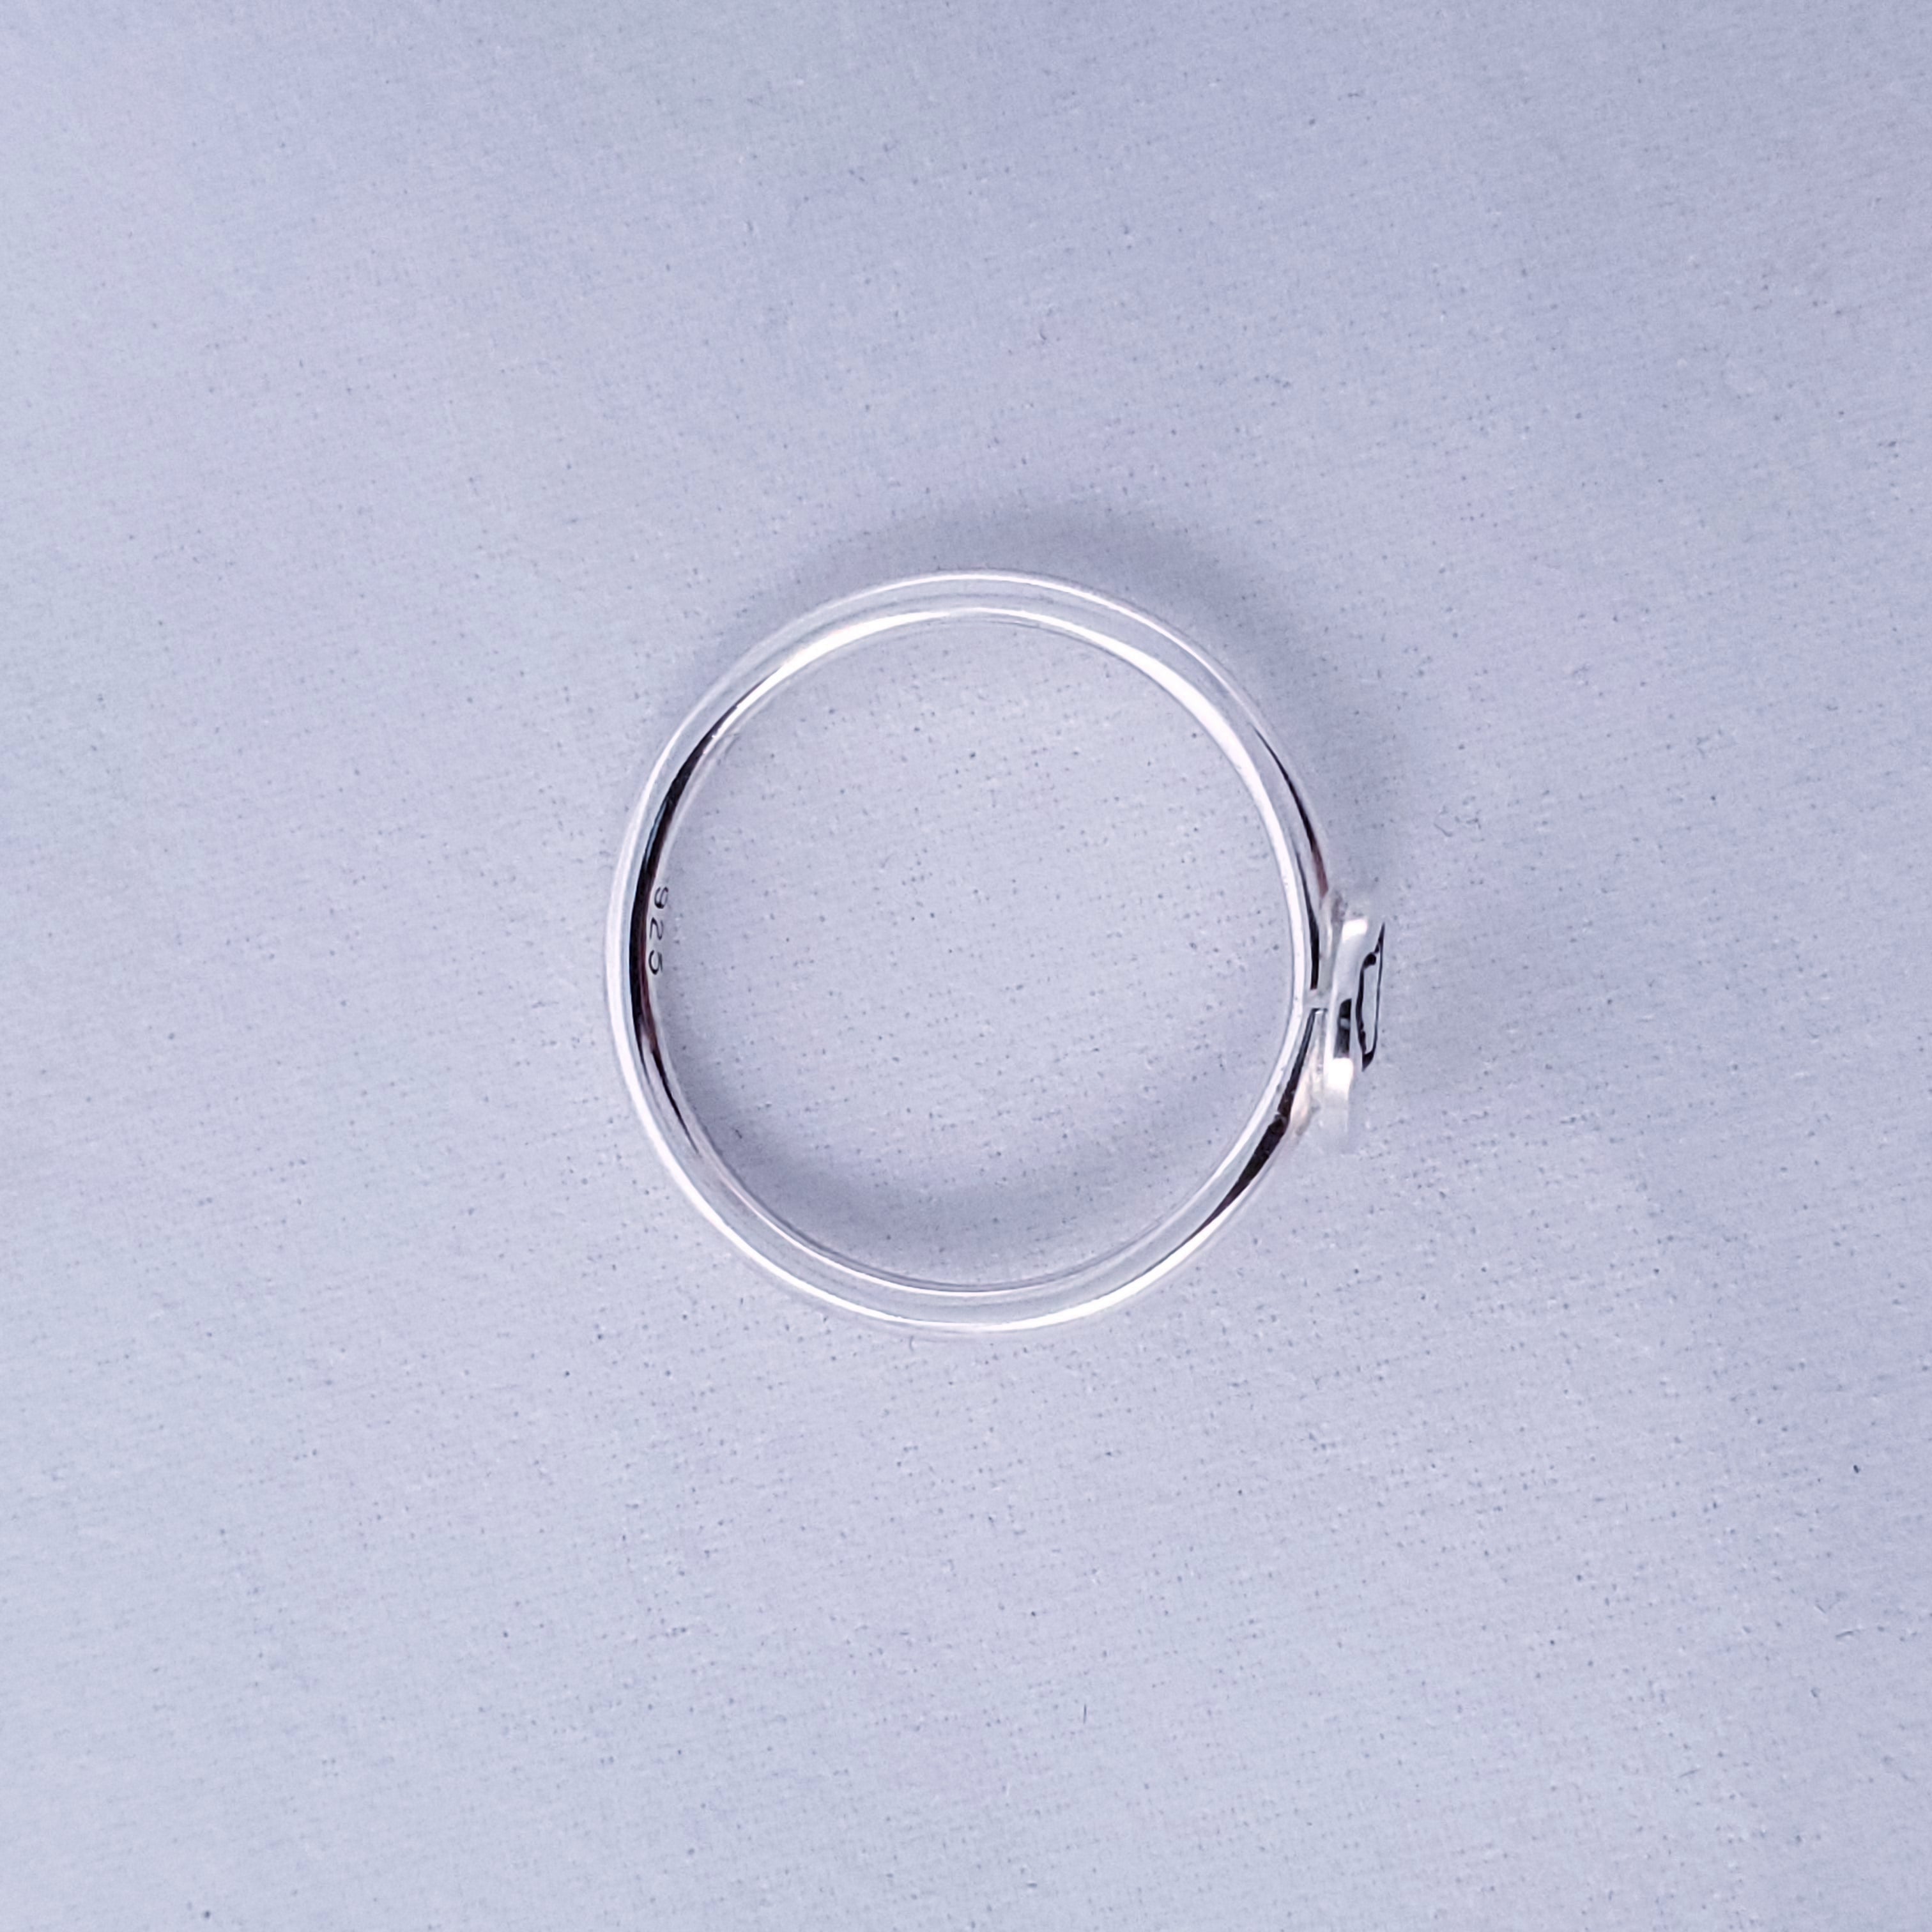 Top view of silver Maine ring